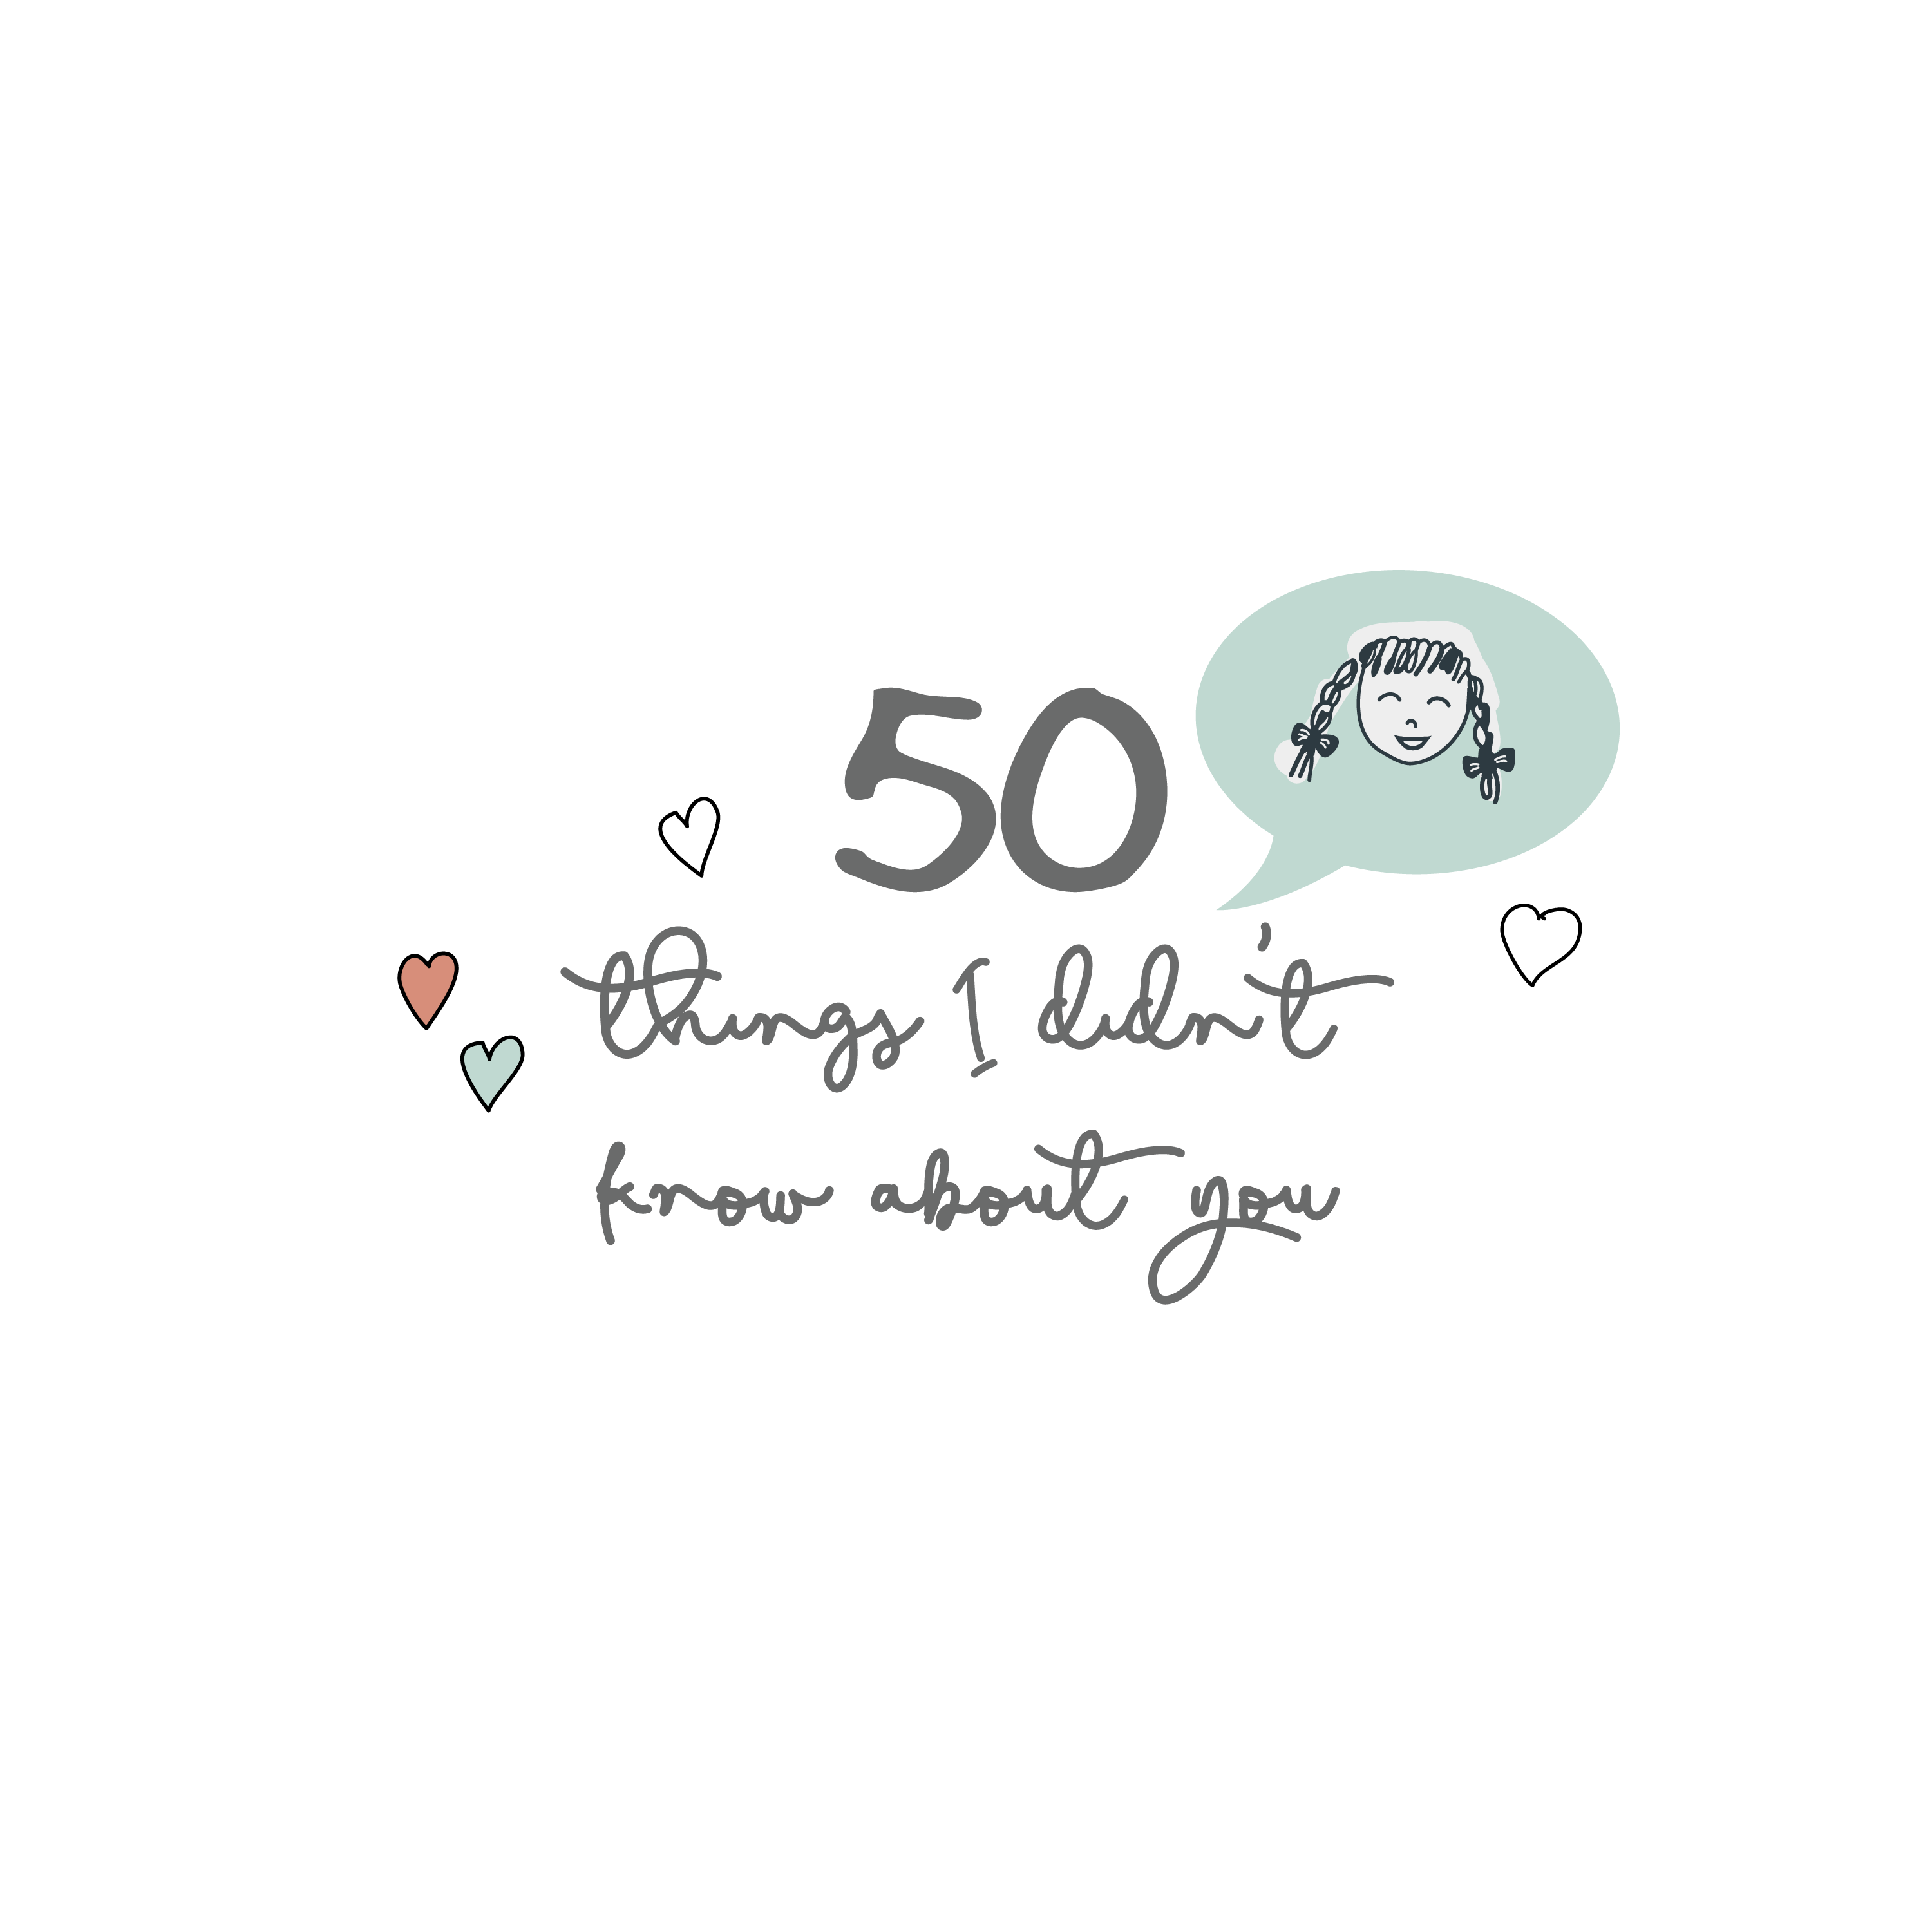 English version of the logo of 50 things I didn&